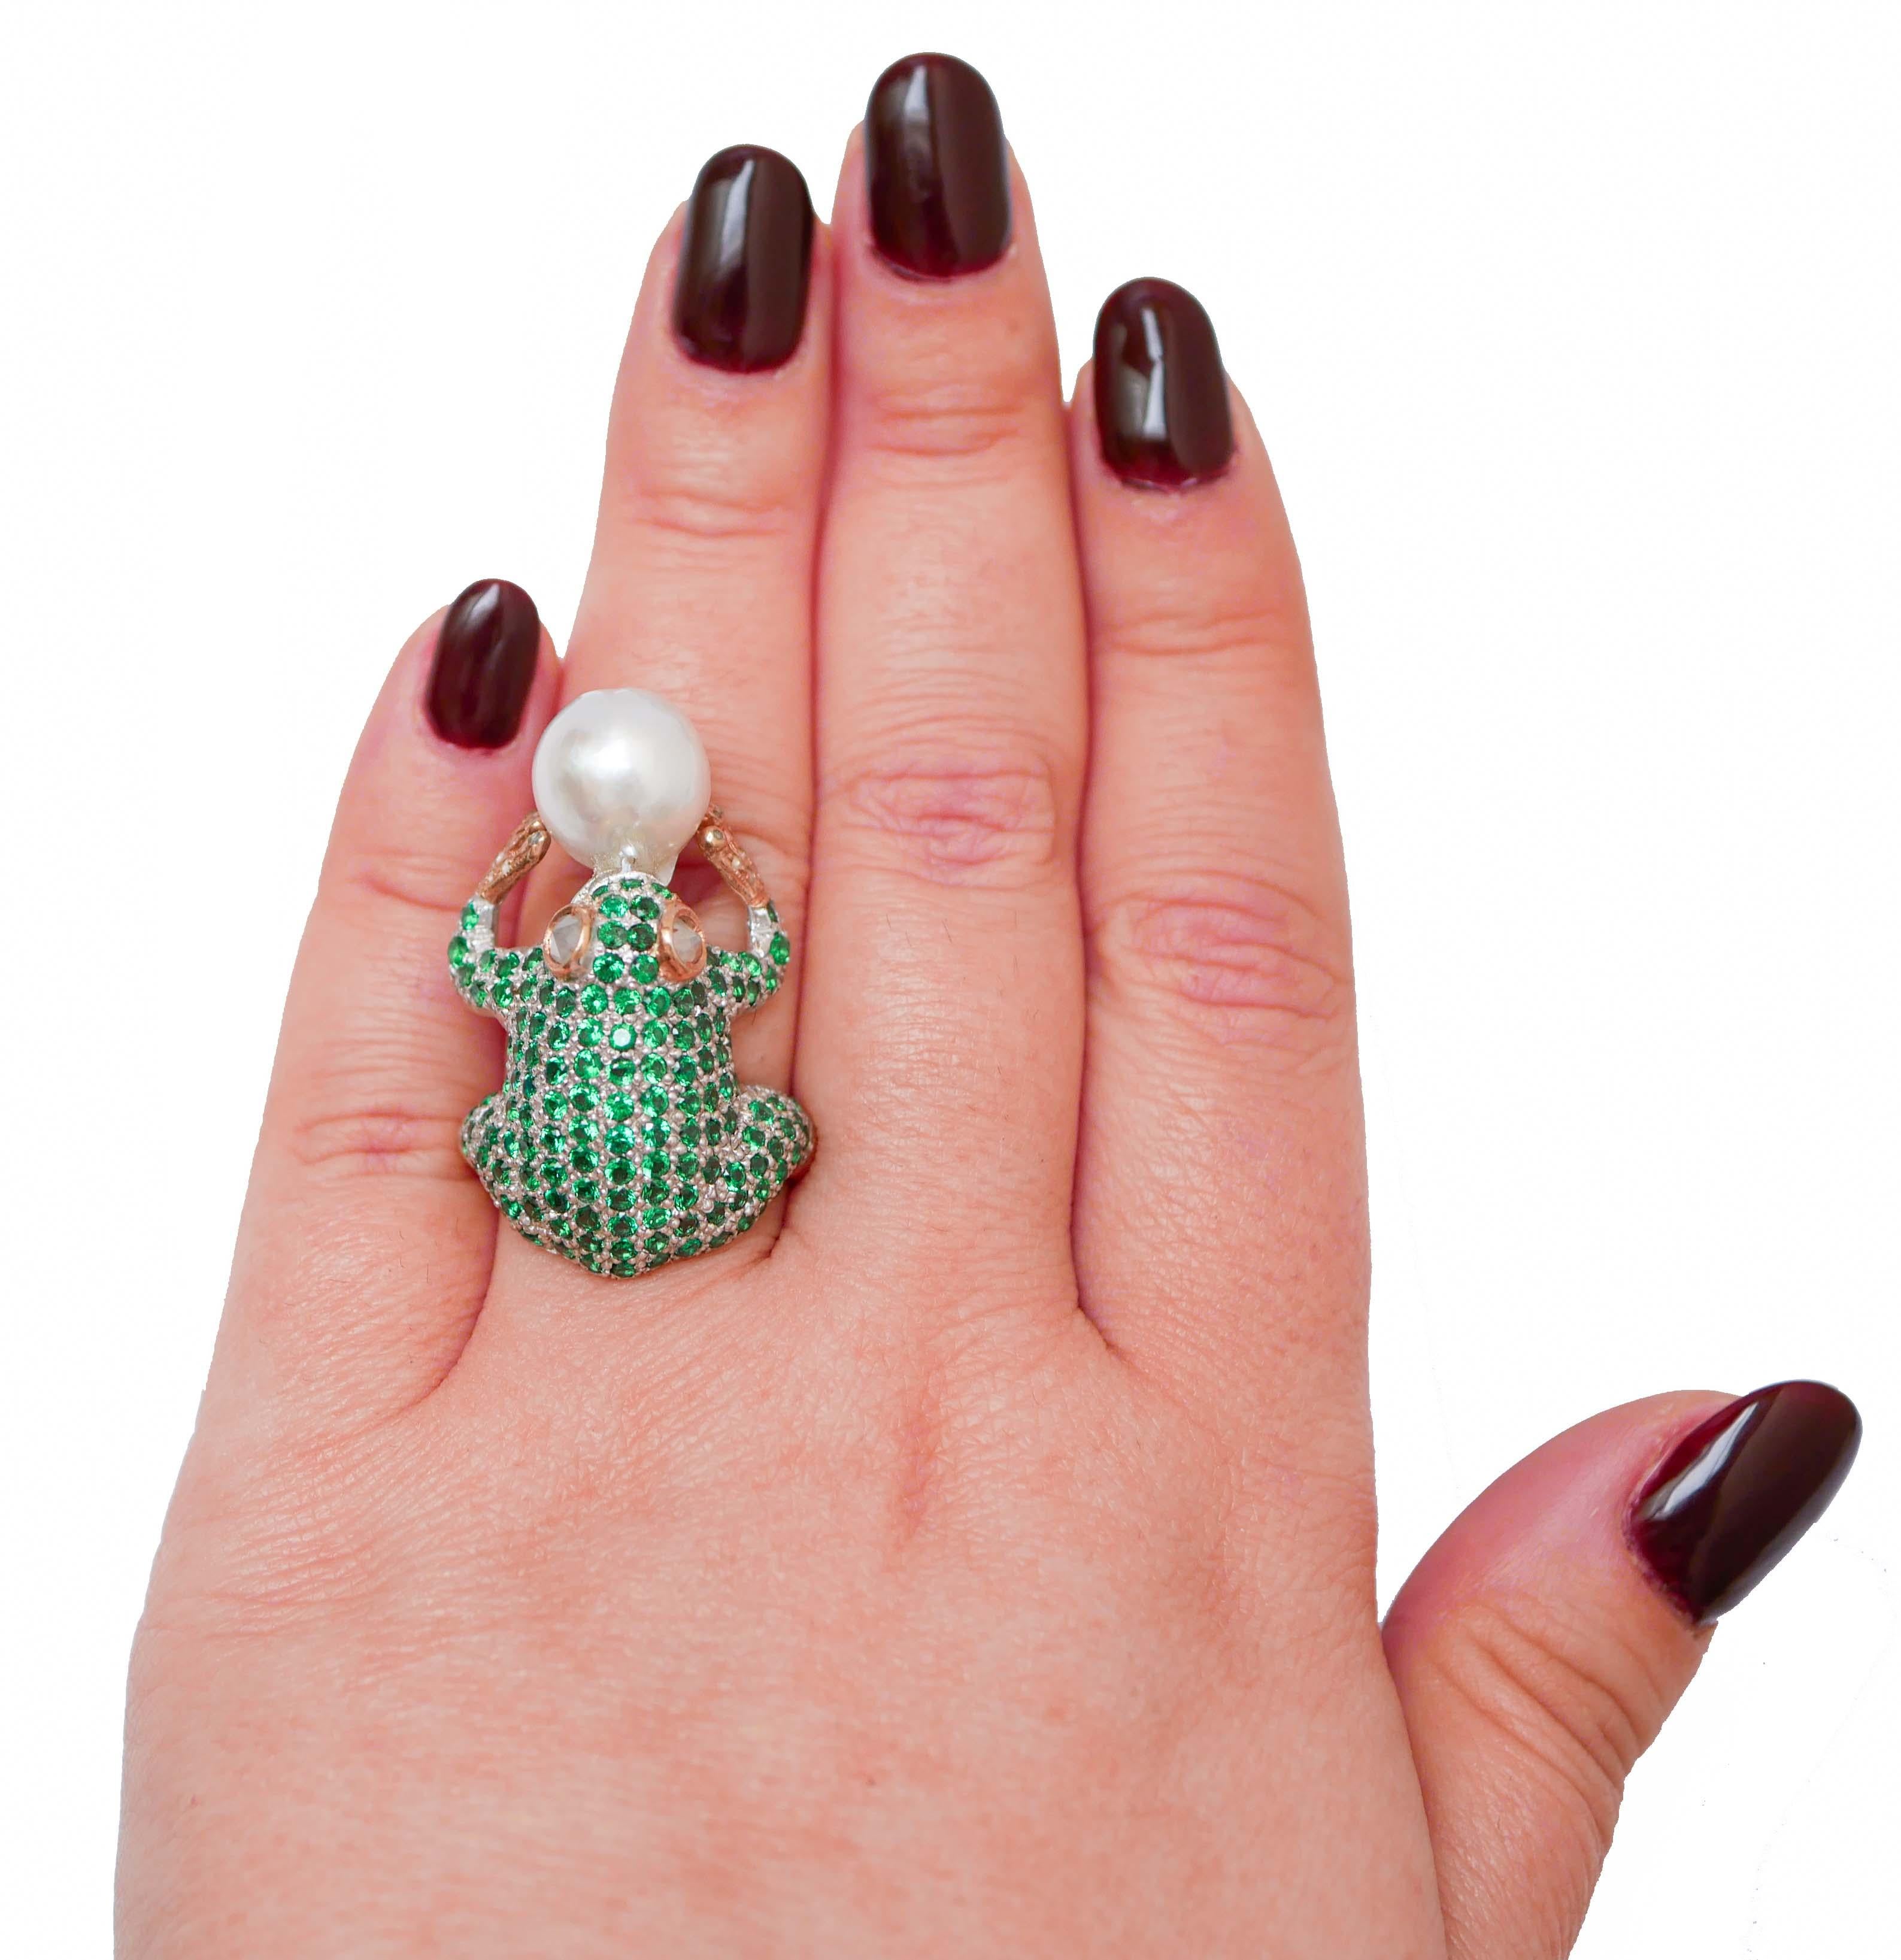 Mixed Cut Hydrothermal Spinel, Pearl, Diamonds, Rose Gold and Silver Frog Ring. For Sale